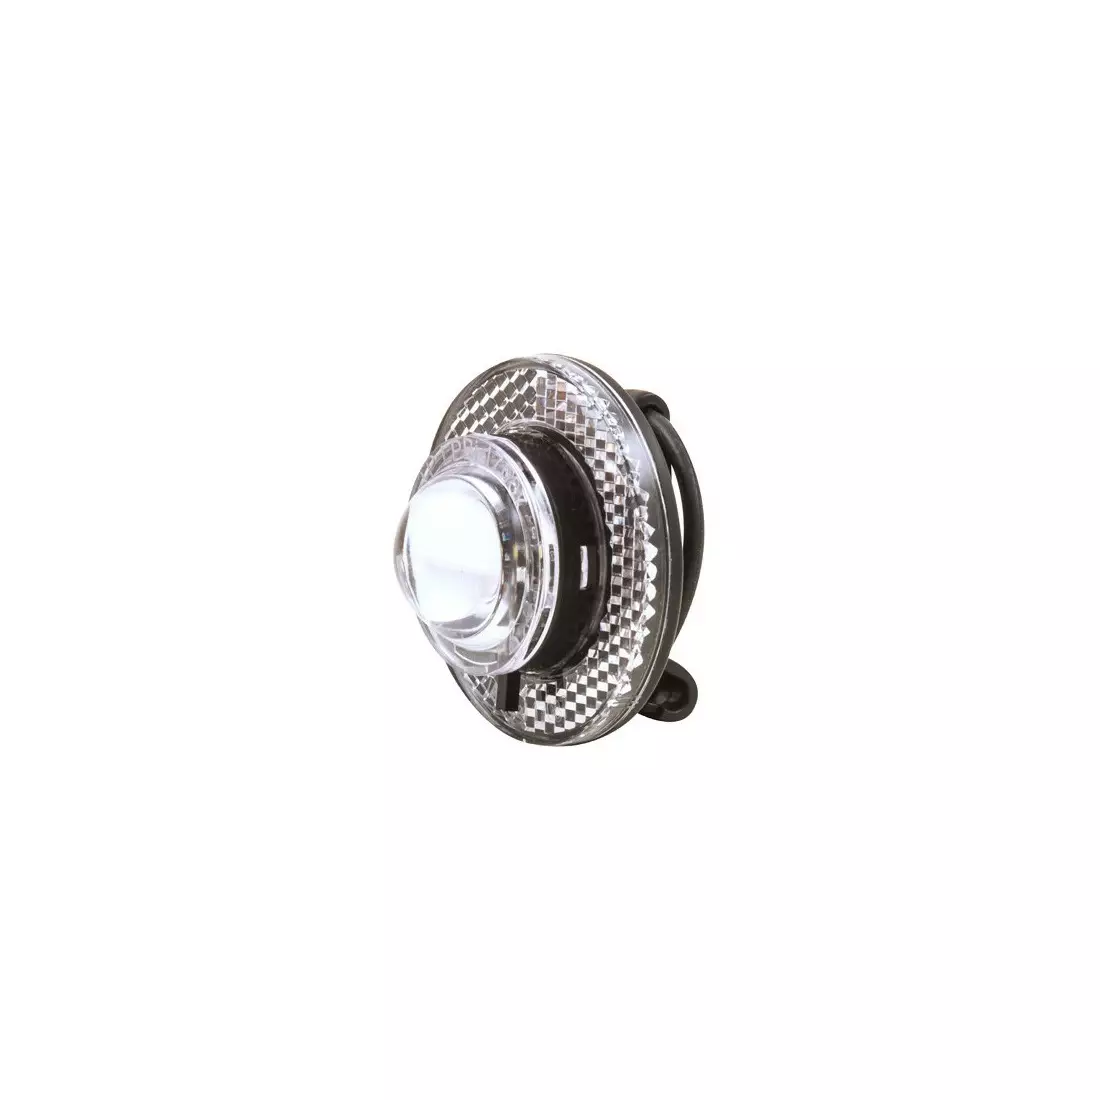 SPANNINGA ILLICO 3 XB 4 LUX front bicycle lamp SNG-162628